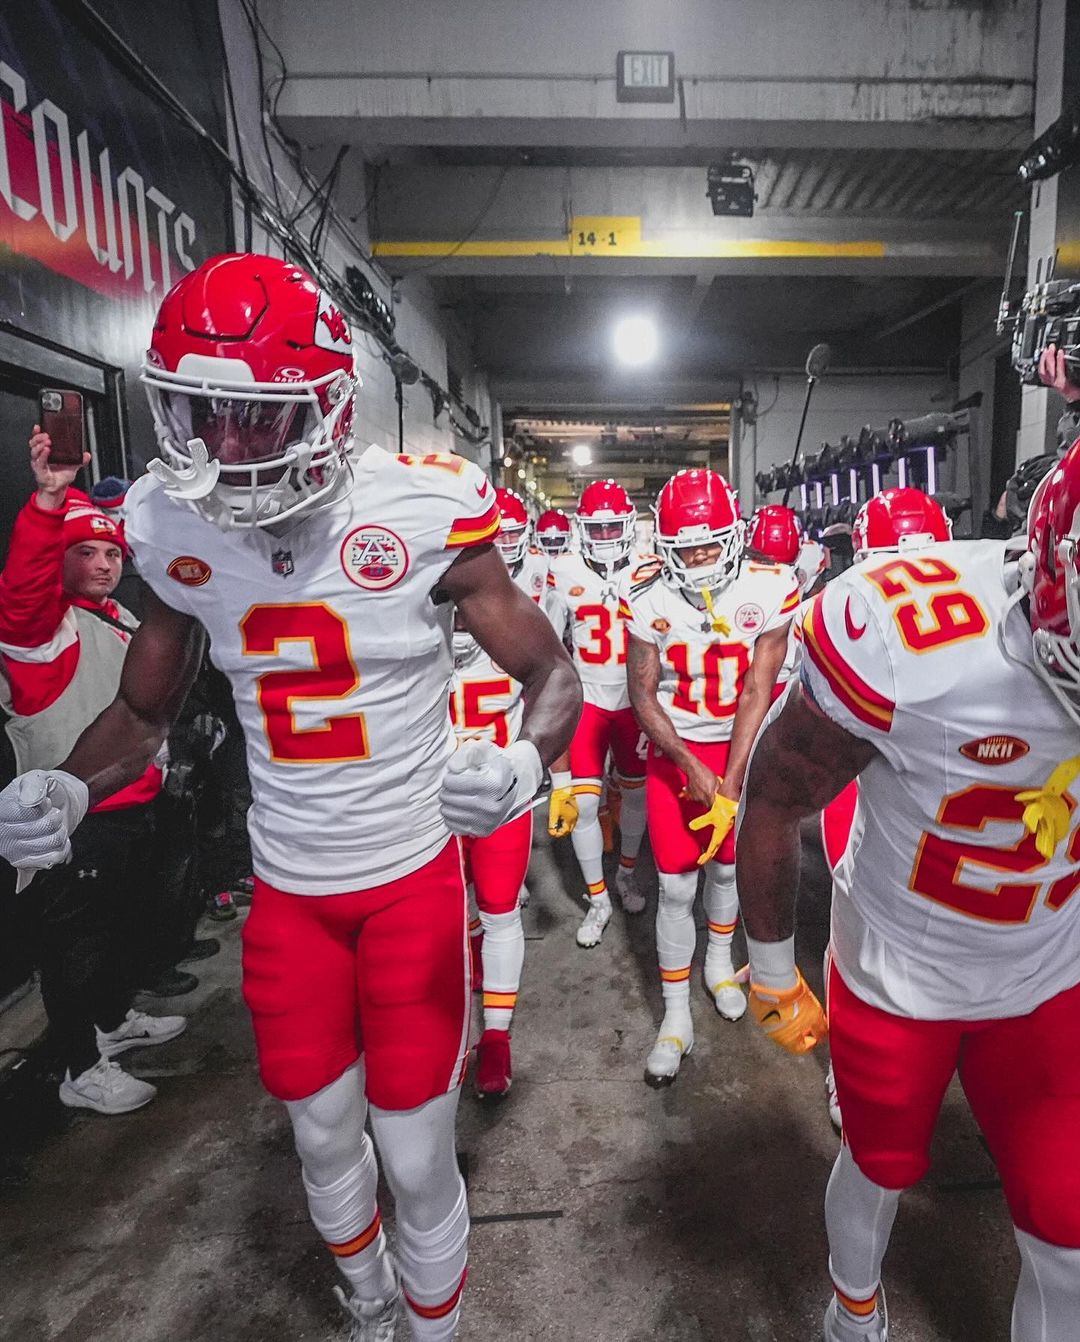 The Kansas City Chiefs, the defending champion from last year’s Super Bowl LVII